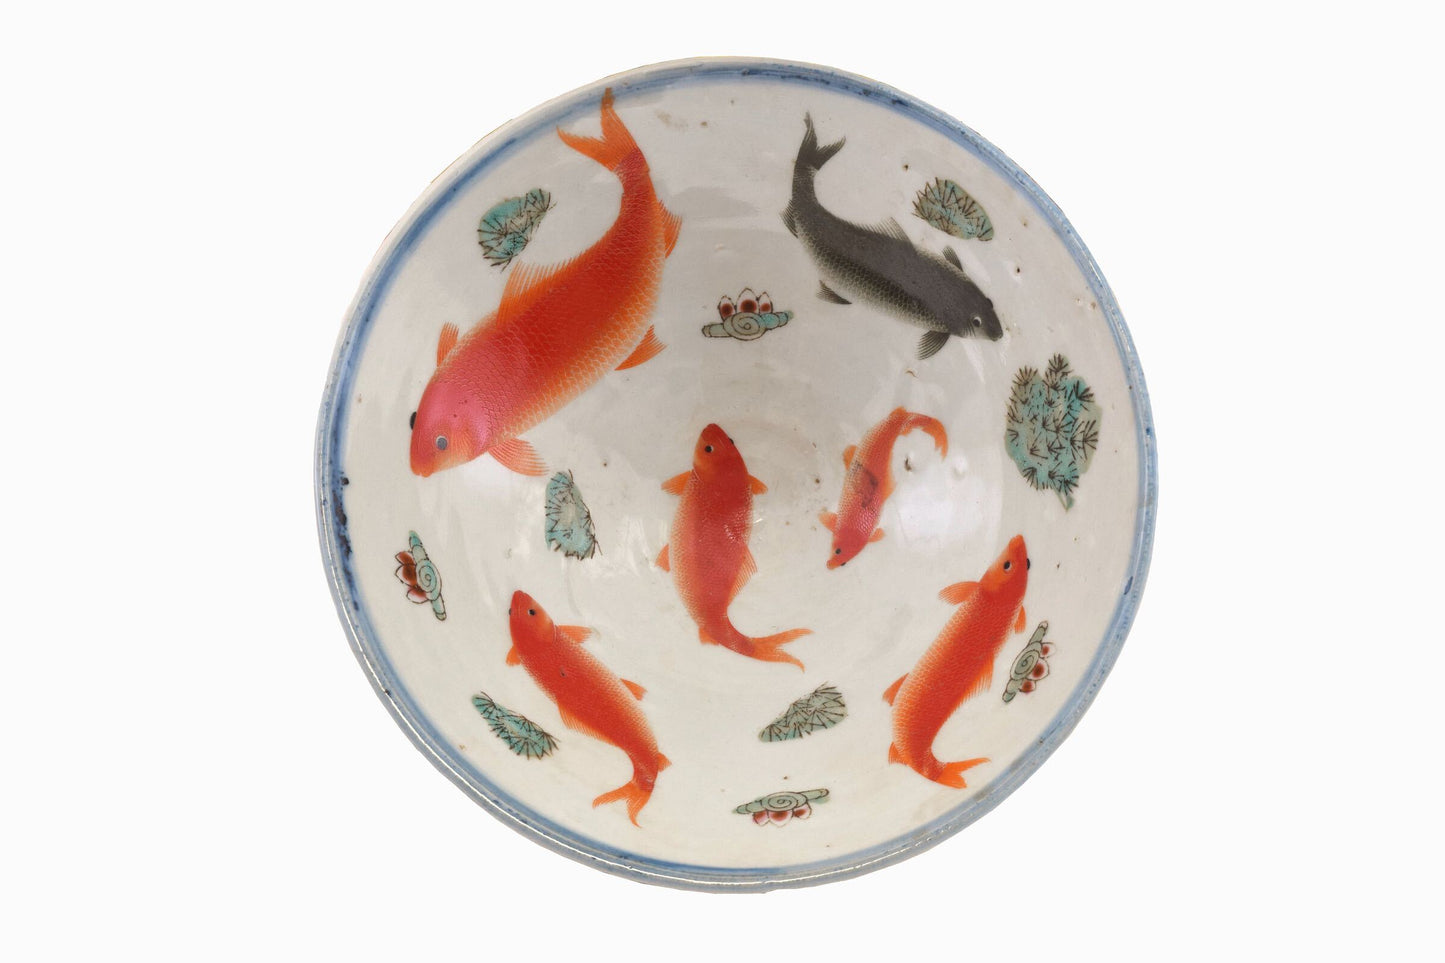 Vintage Chinese bowl decorated with goldfish and koi carp